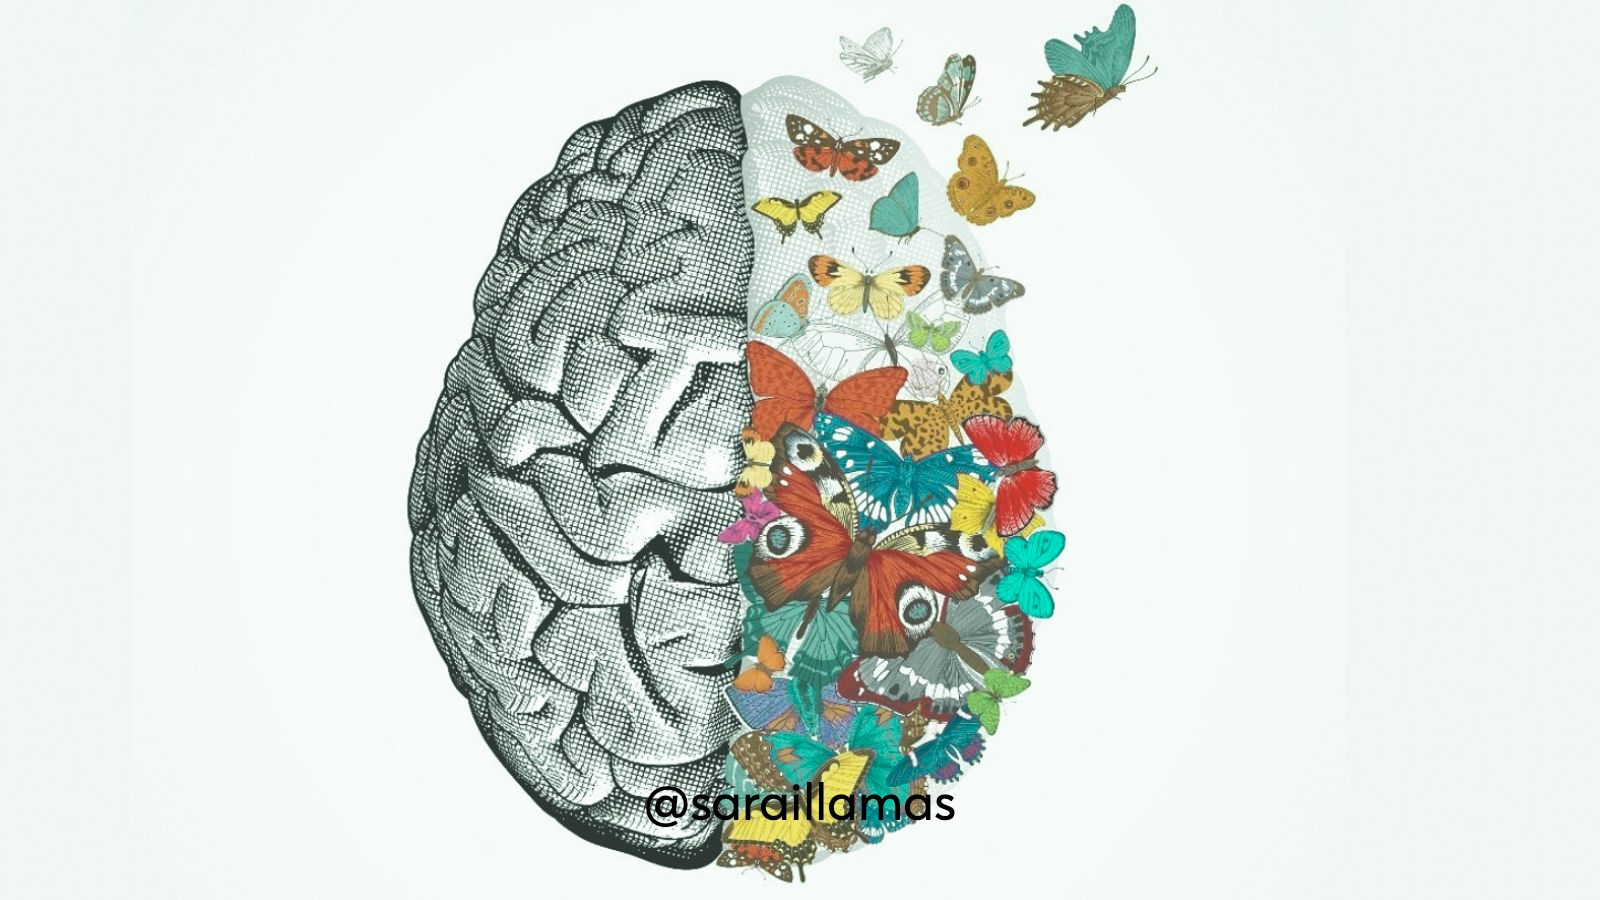 An illustration of a brain that is half made of butterflies